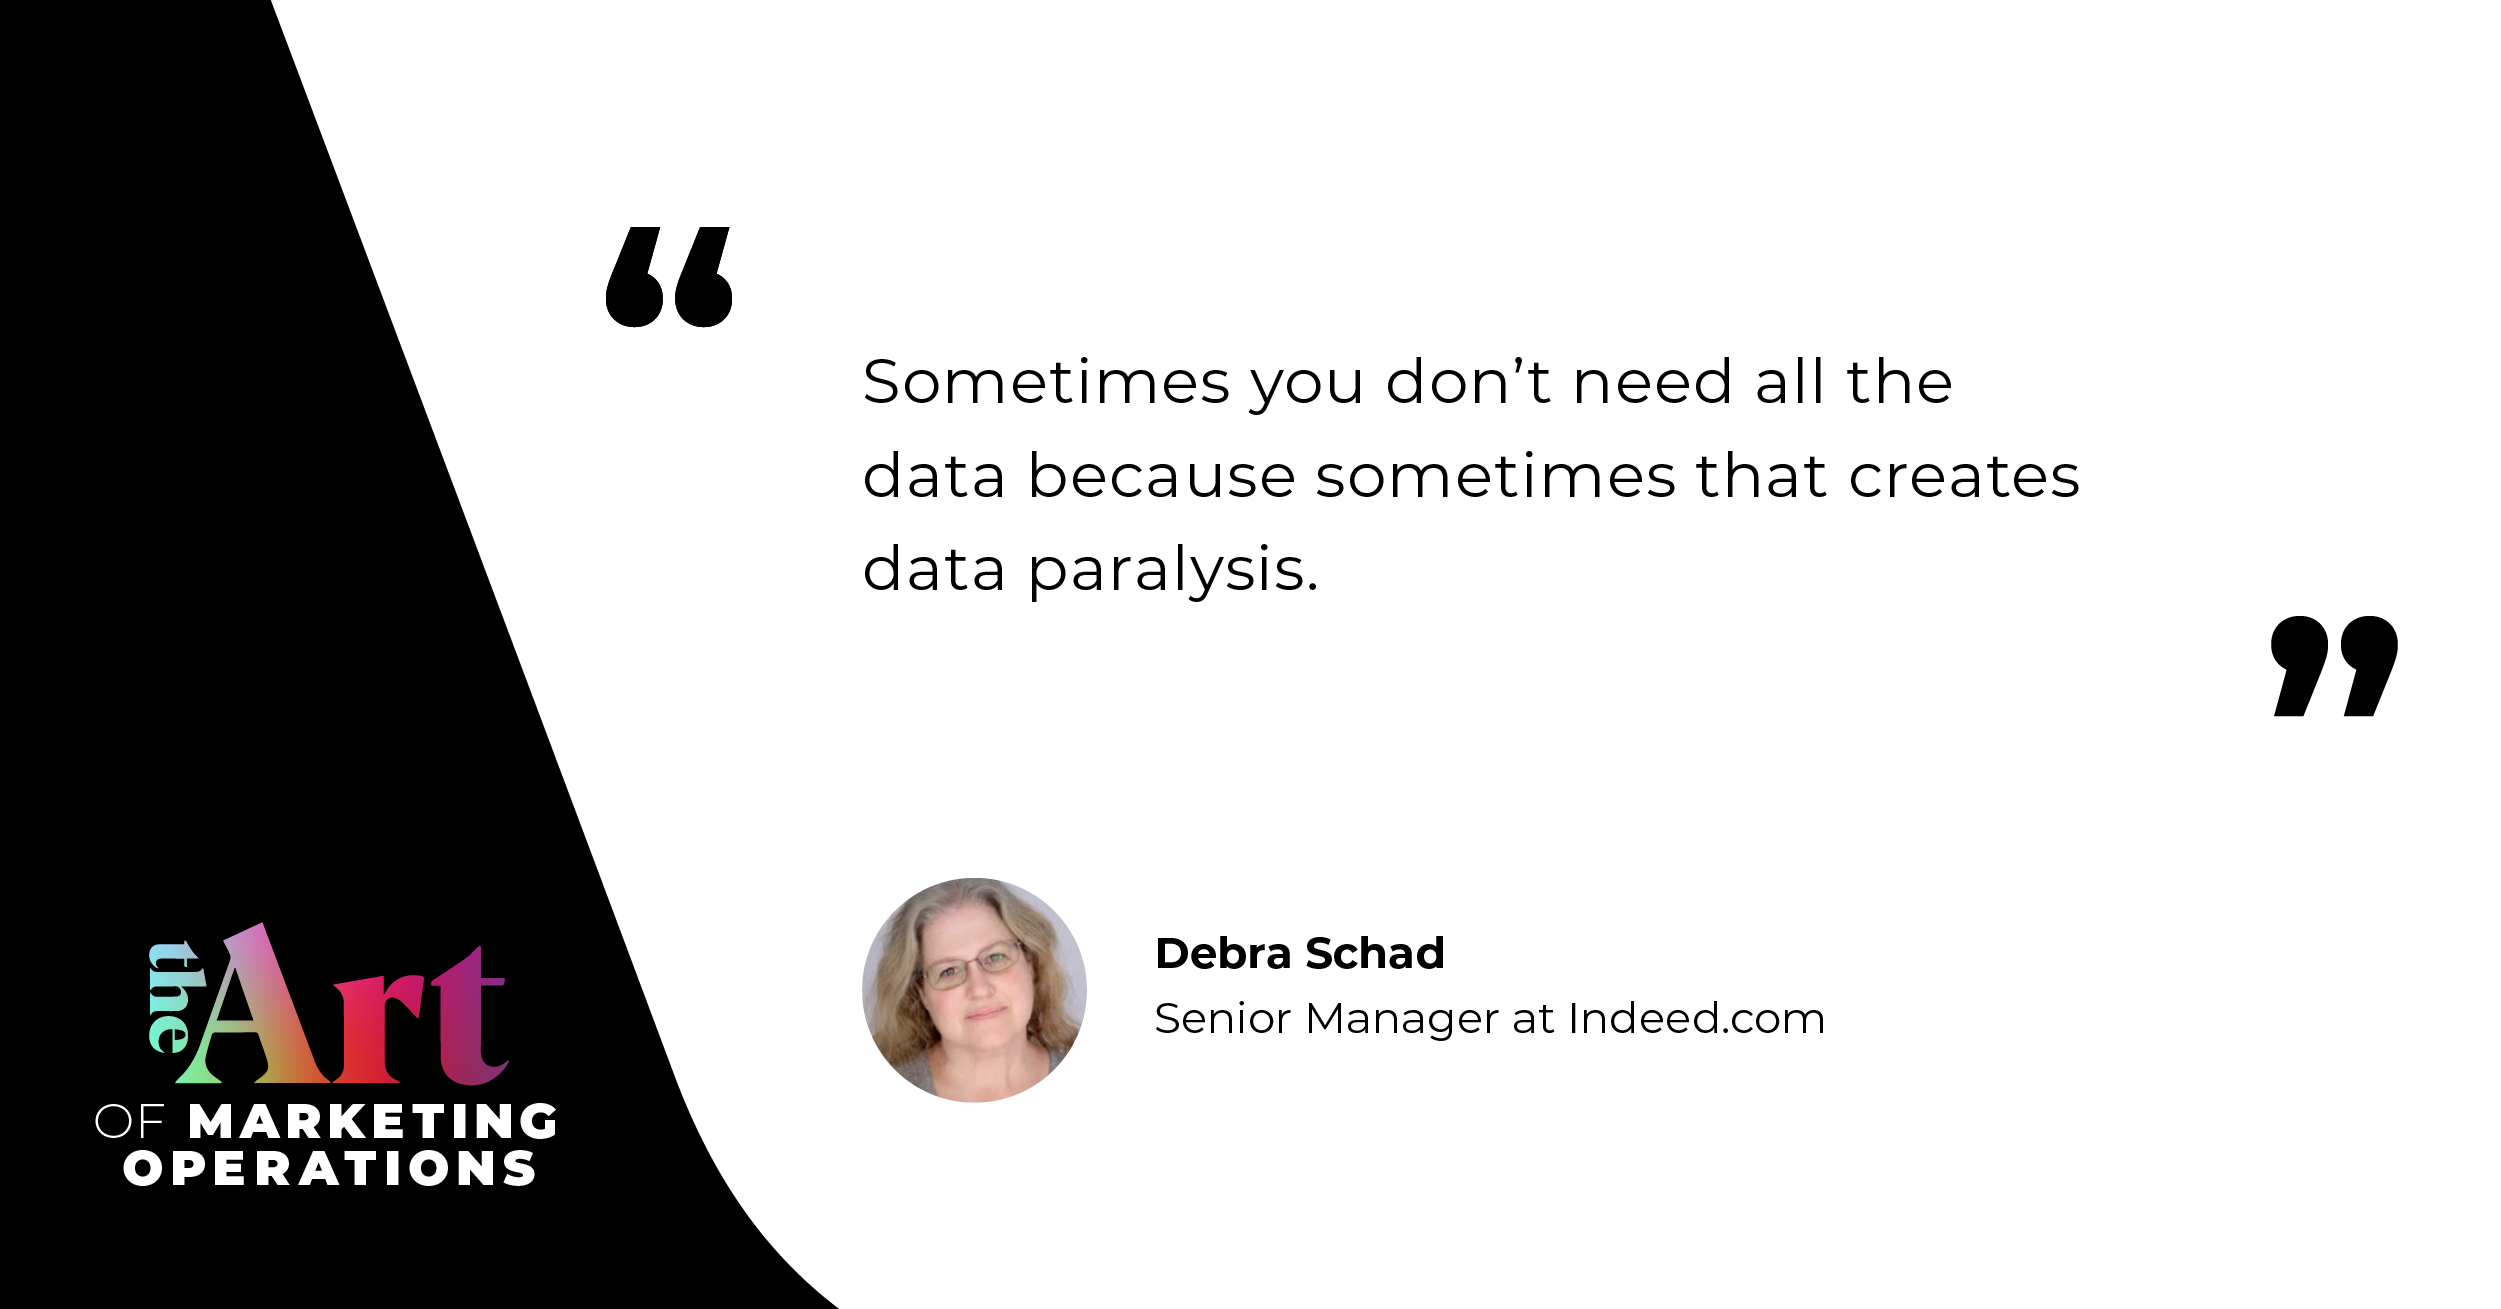 “Sometimes you don't need all the data because sometimes that creates data paralysis.”  — Debra Schad